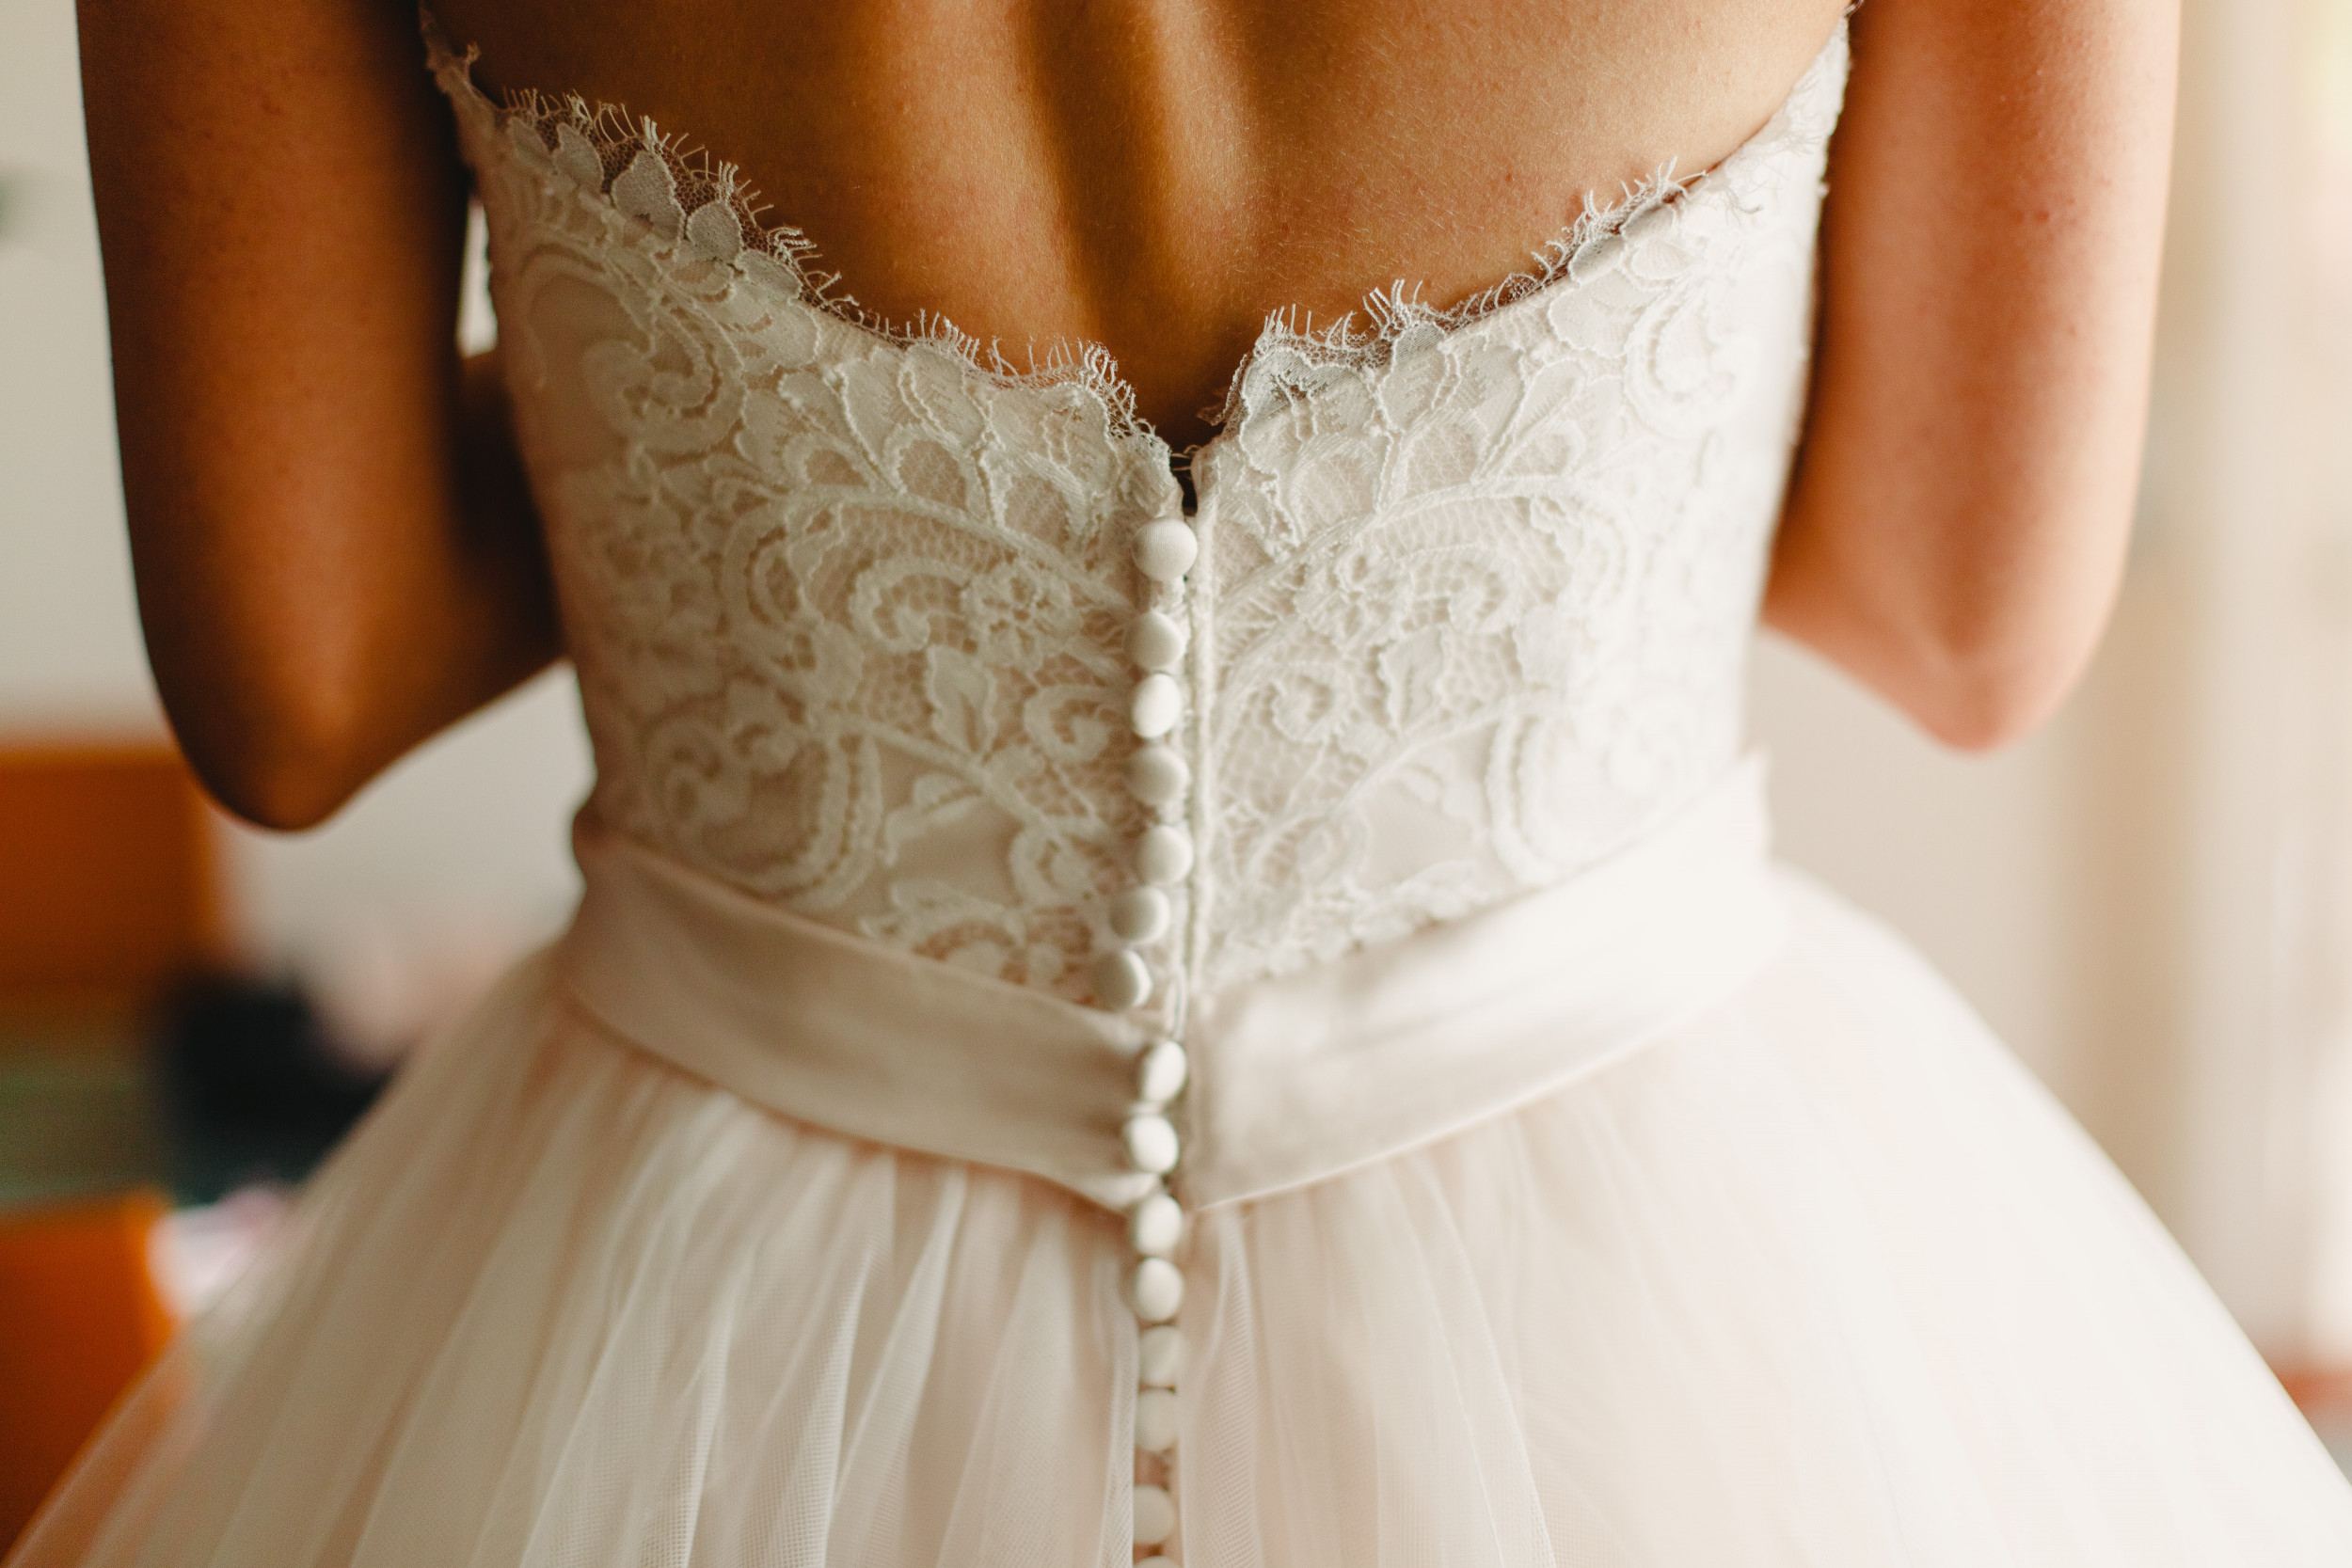 Internet Backs Woman For Not Designing Friend’s Wedding Dress For Cost of Materials